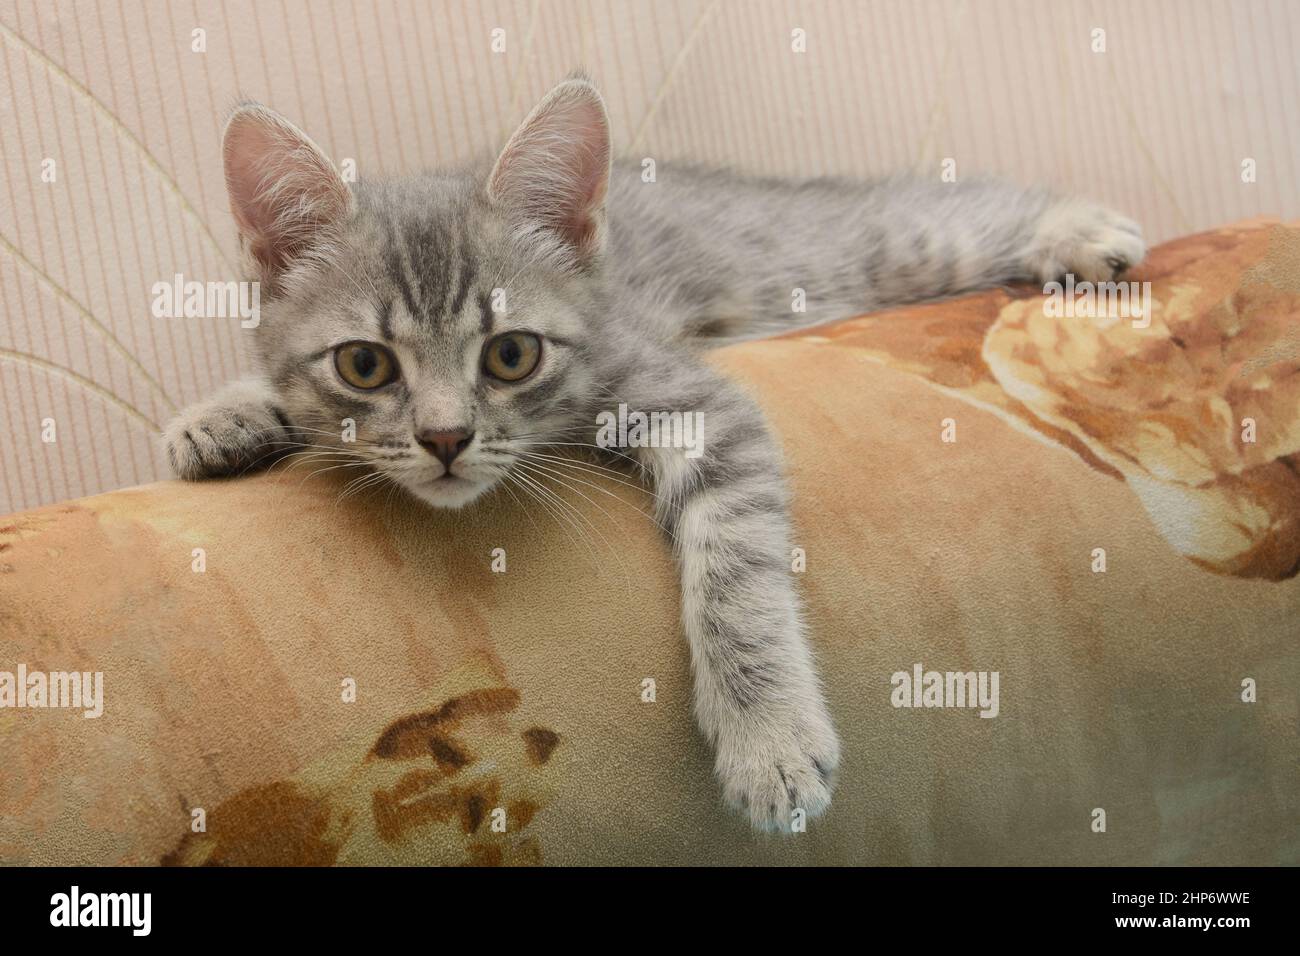 Sad young cat tabby lies and looks at camera. Stock Photo